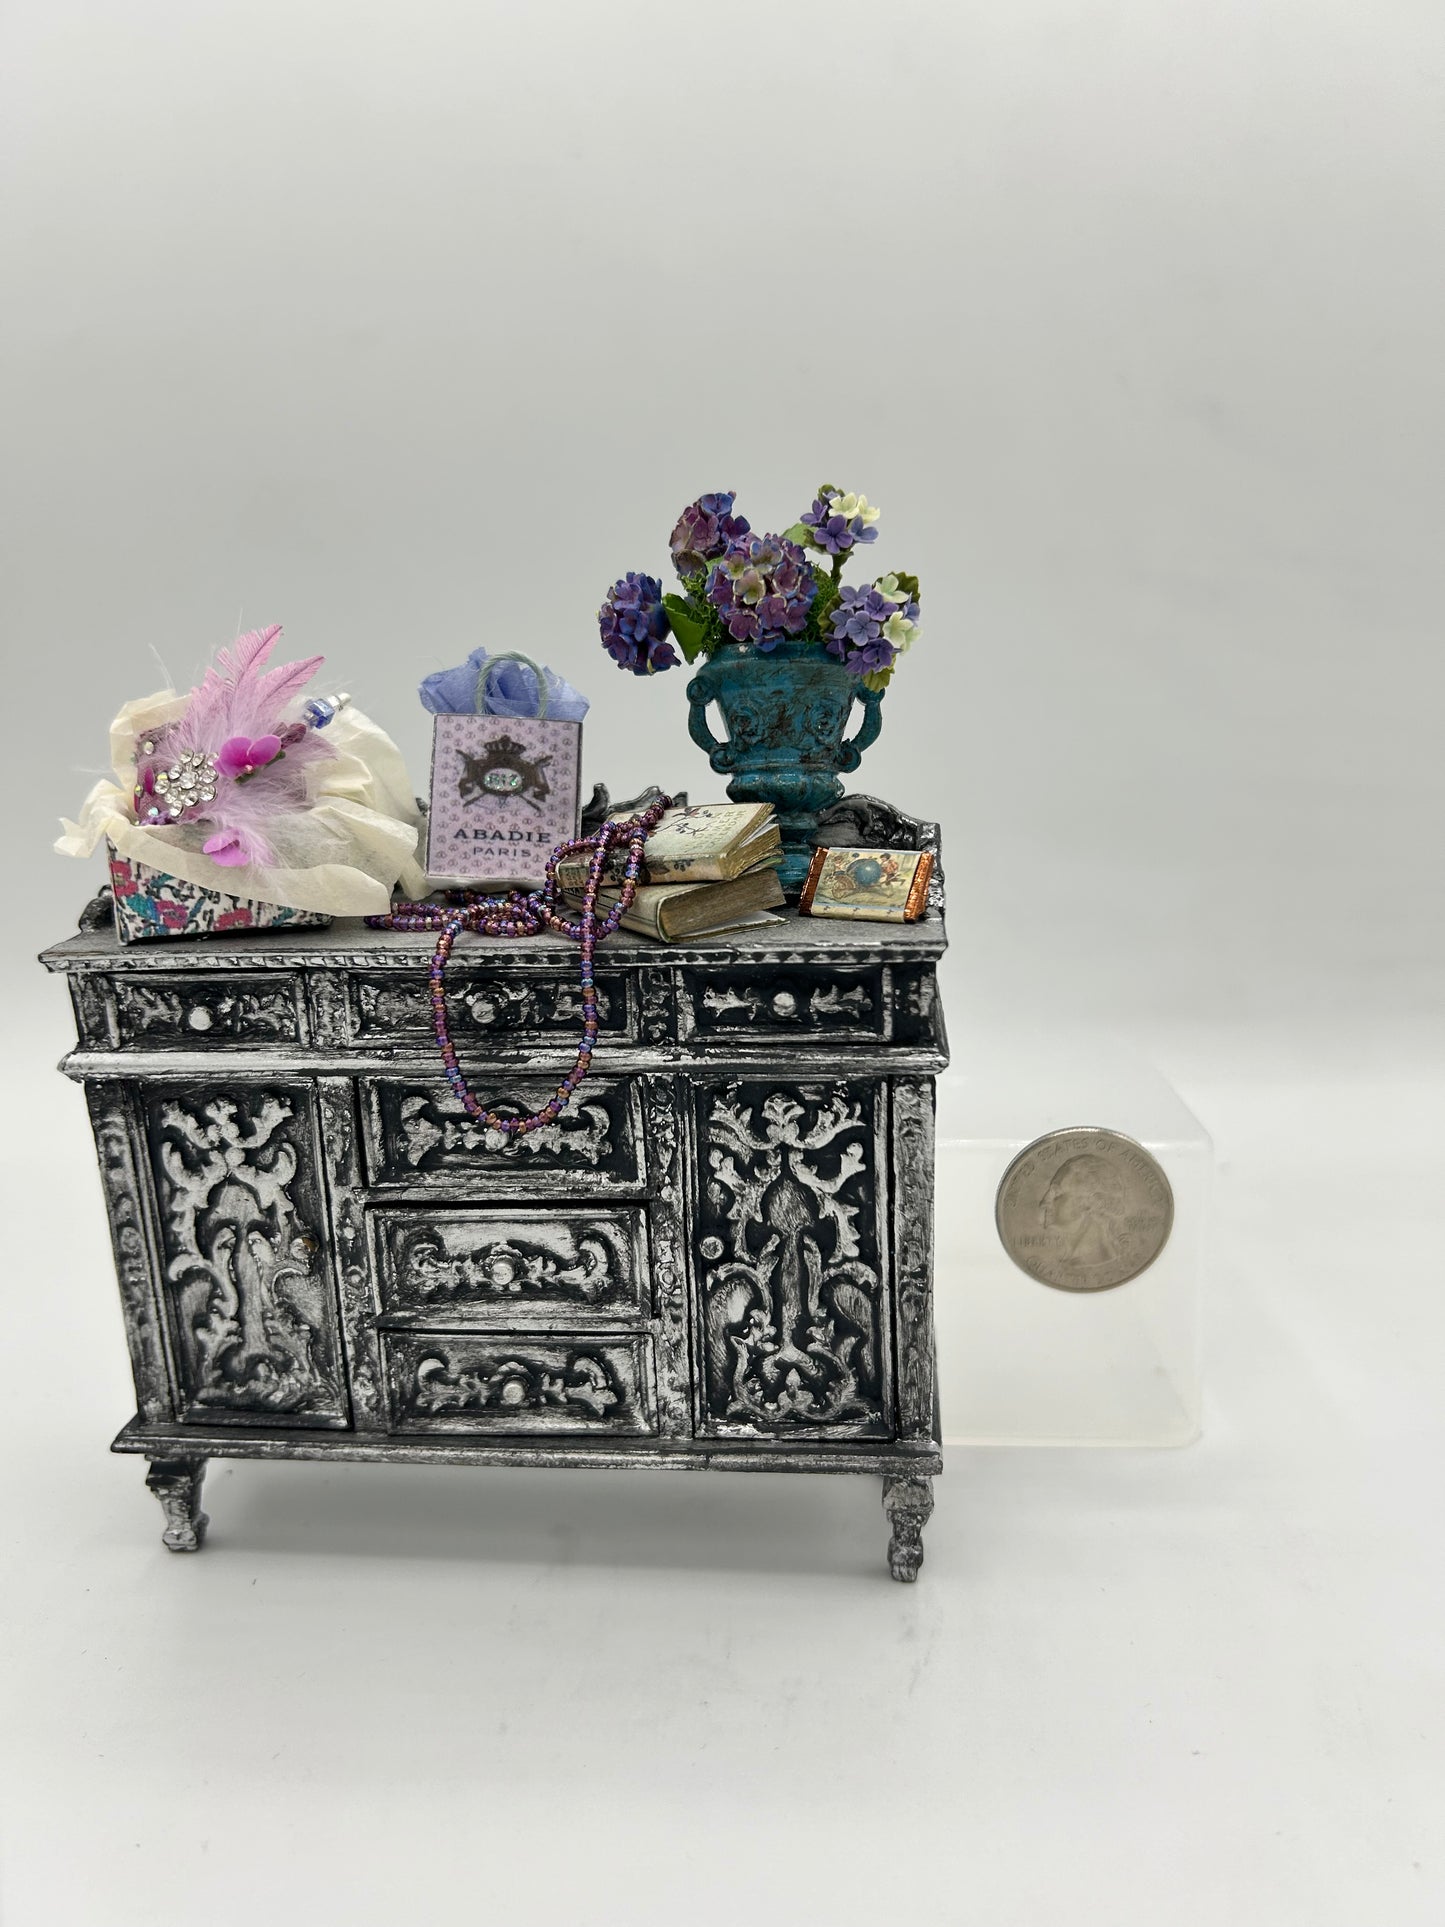 Aristocratic Attic Silver Decorated Sideboard with Purple Accents